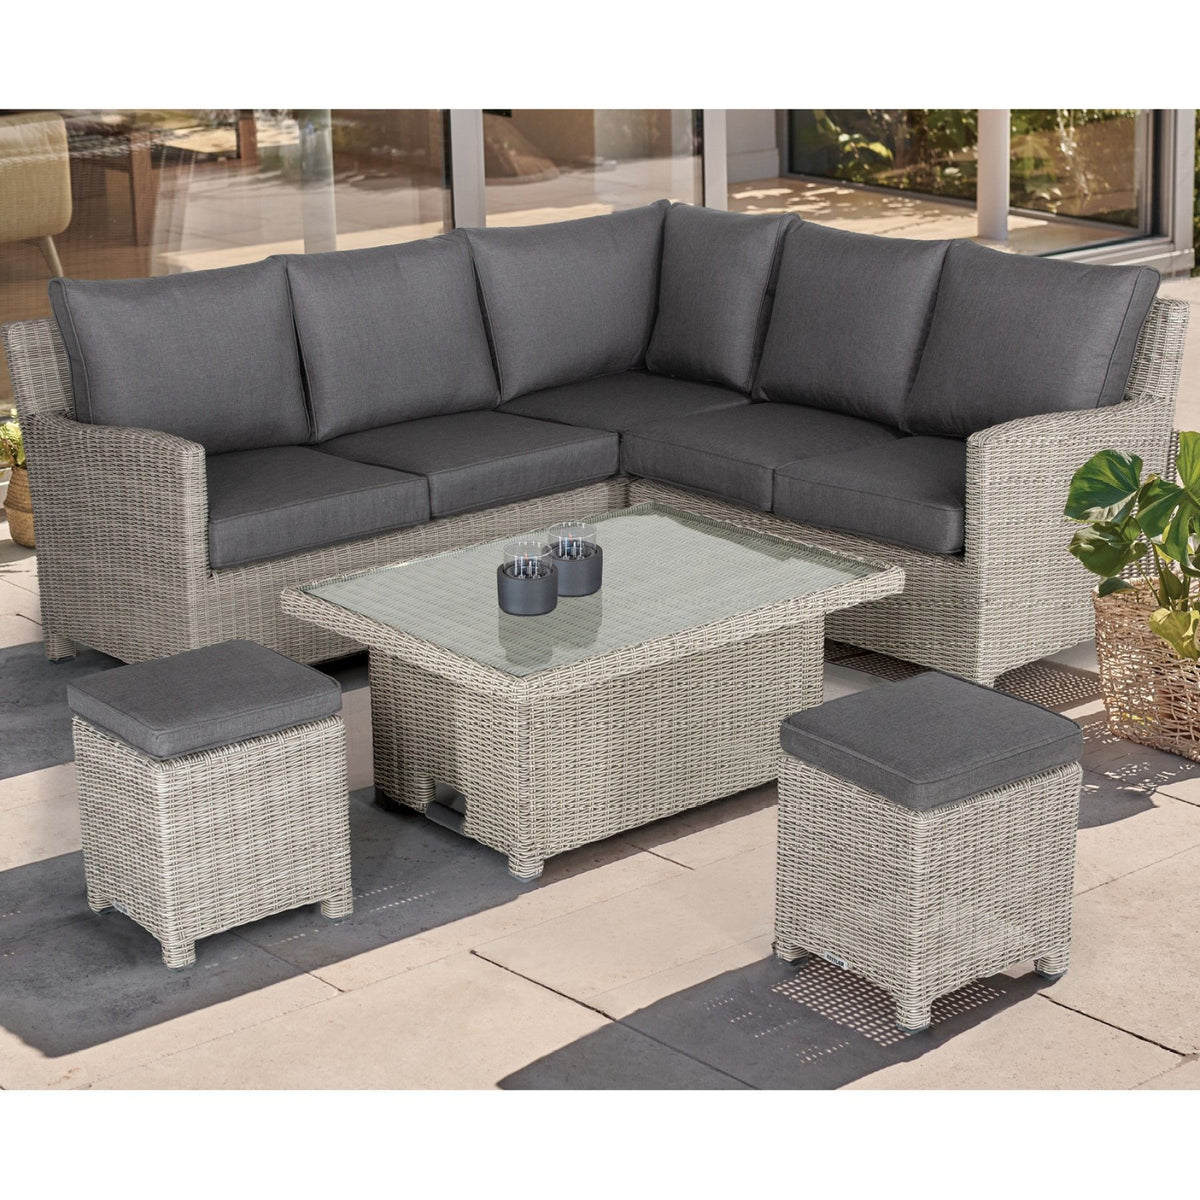 Kettler Palma Signature Mini Corner White Wash Wicker Sofa Set with High Low Glass Top Table